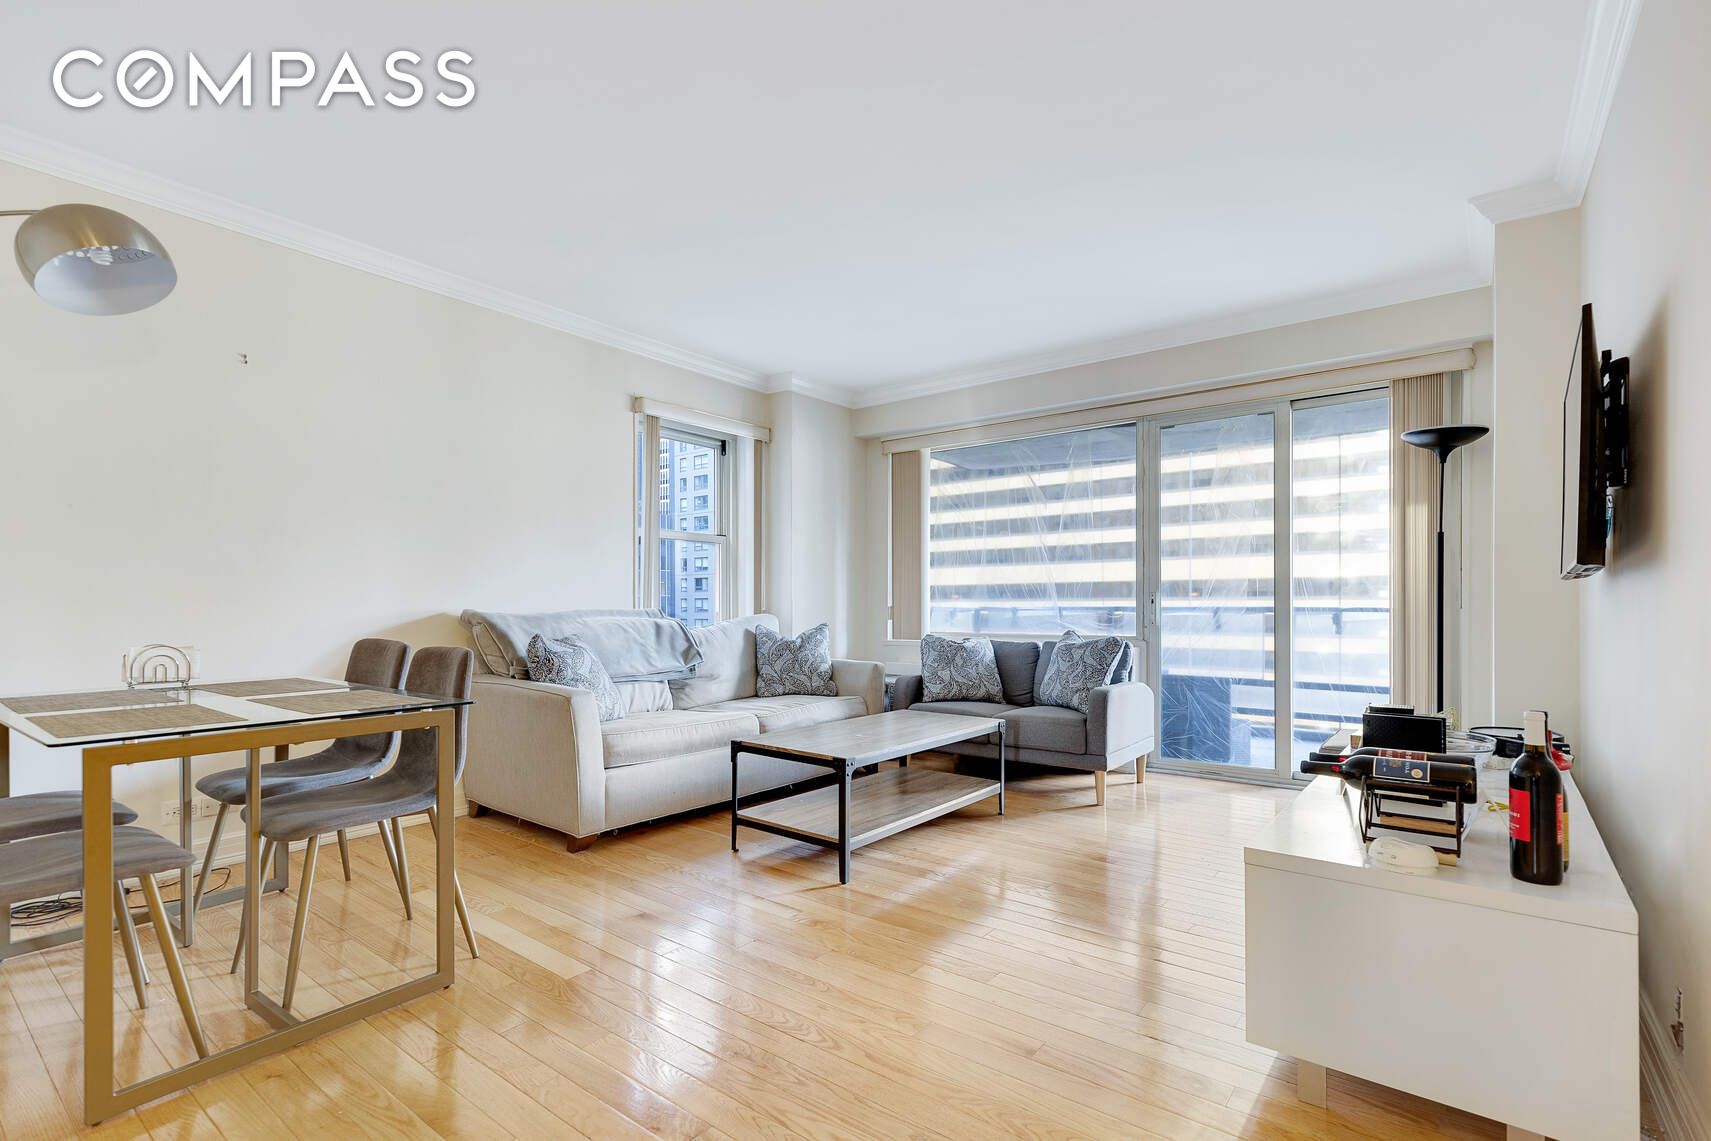 159 West 53rd Street 18B, Theater District, Midtown West, NYC - 2 Bedrooms  
1.5 Bathrooms  
4 Rooms - 